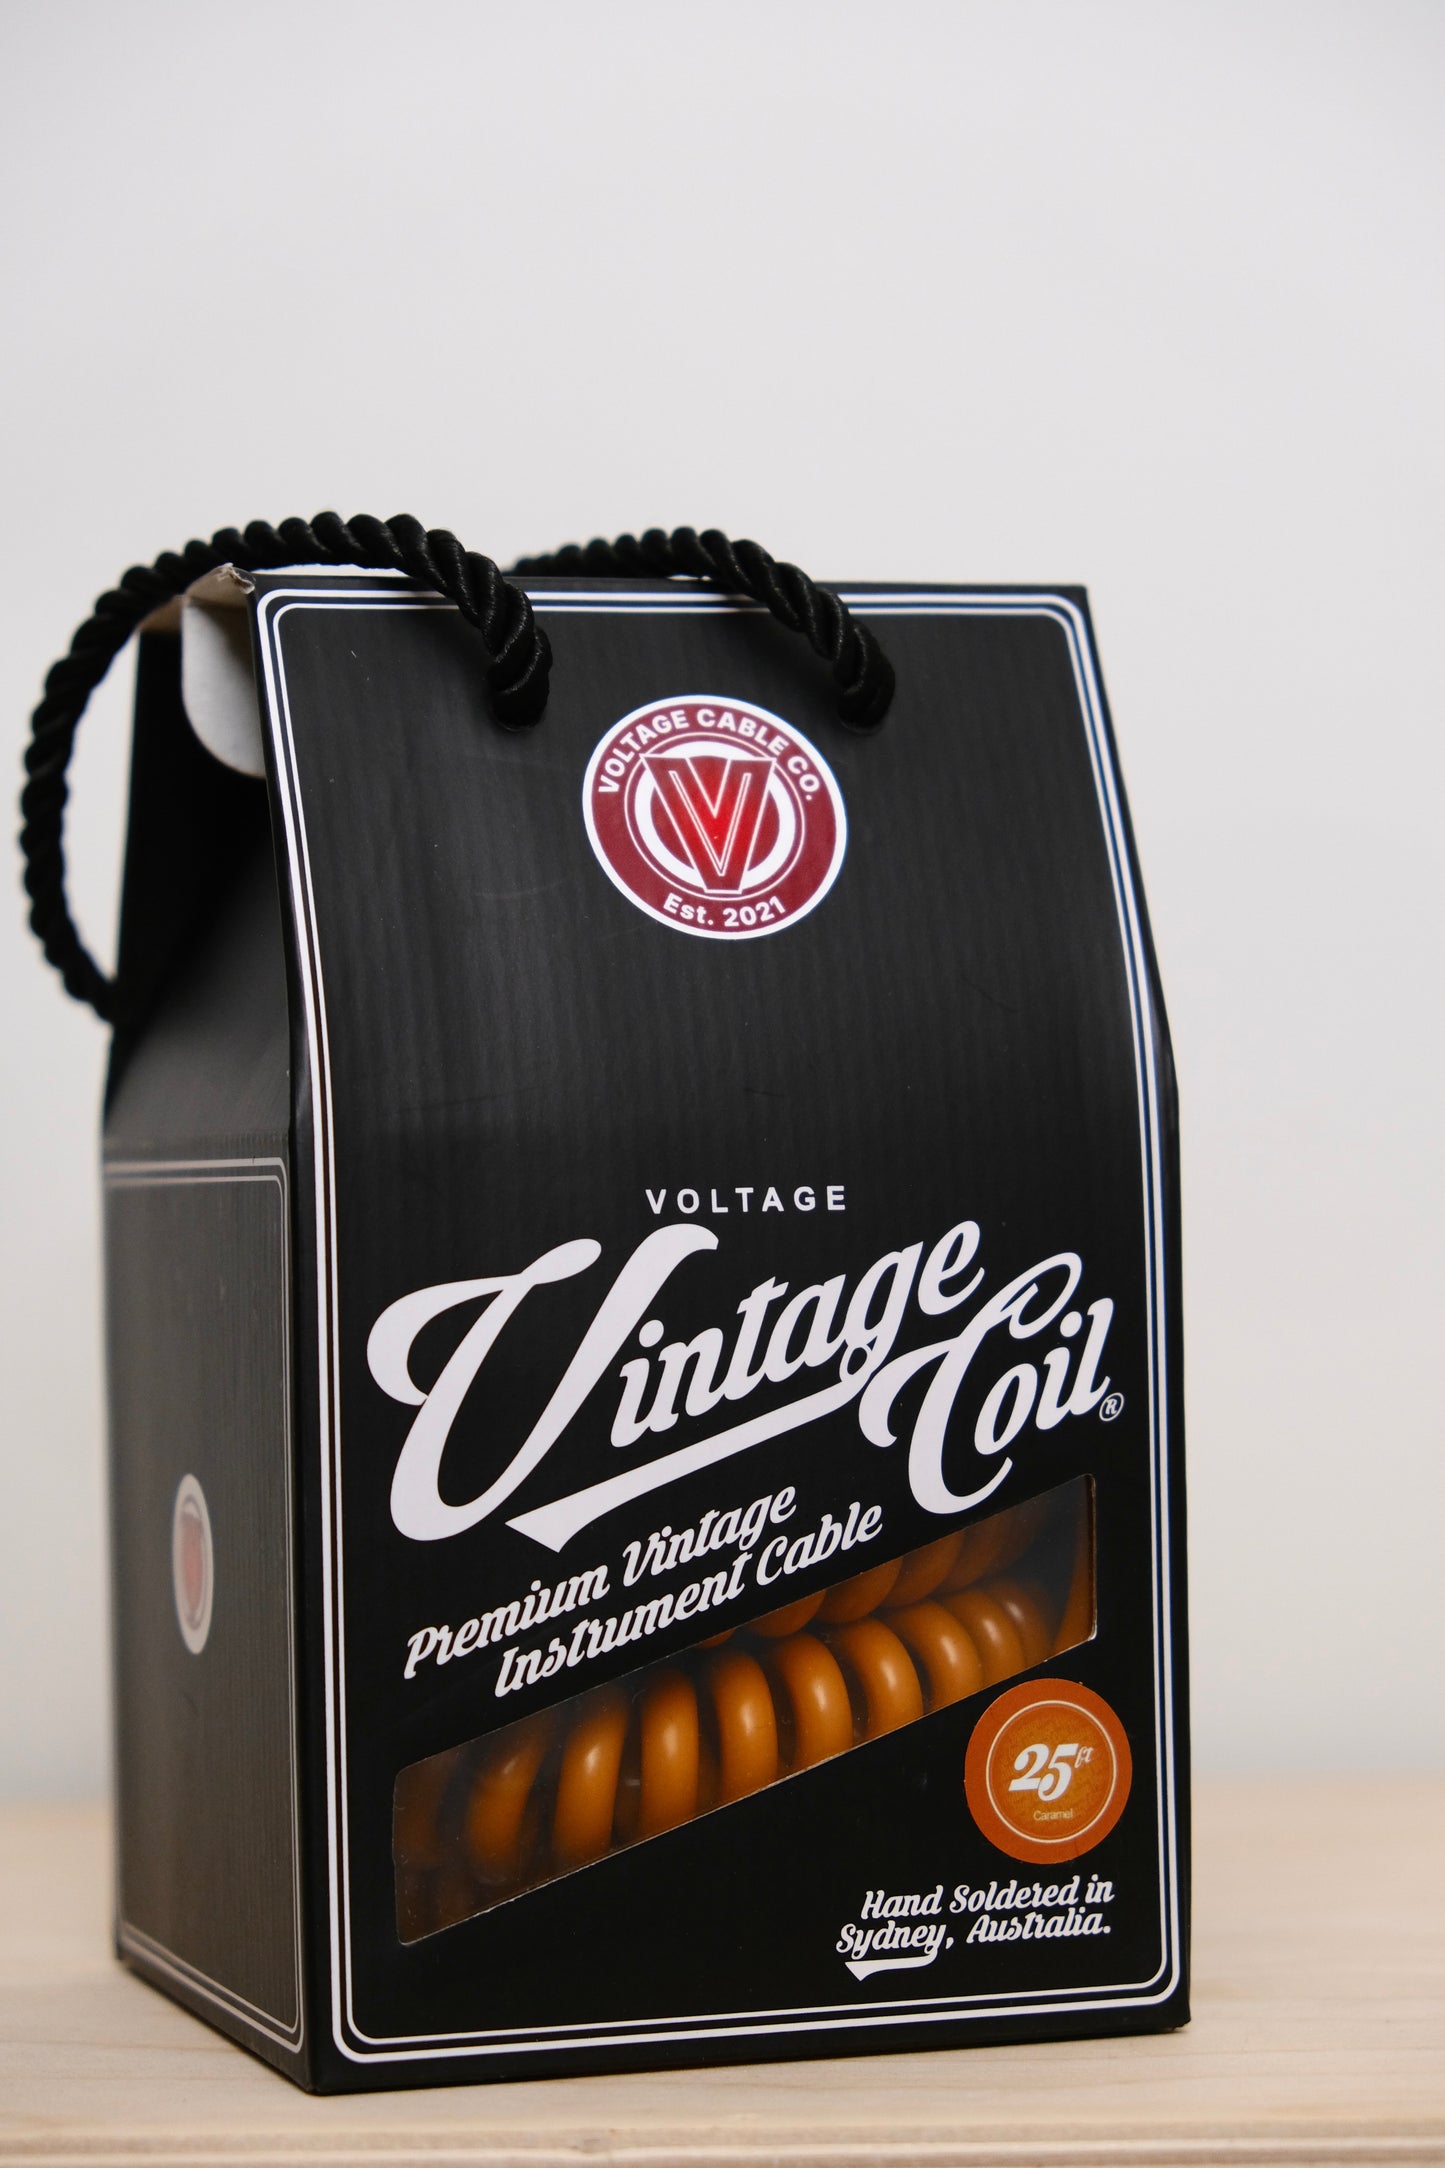 Voltage Cable Co. Vintage Coil Instrument Cable 25' - Caramel Straight to Right Angle Plugs